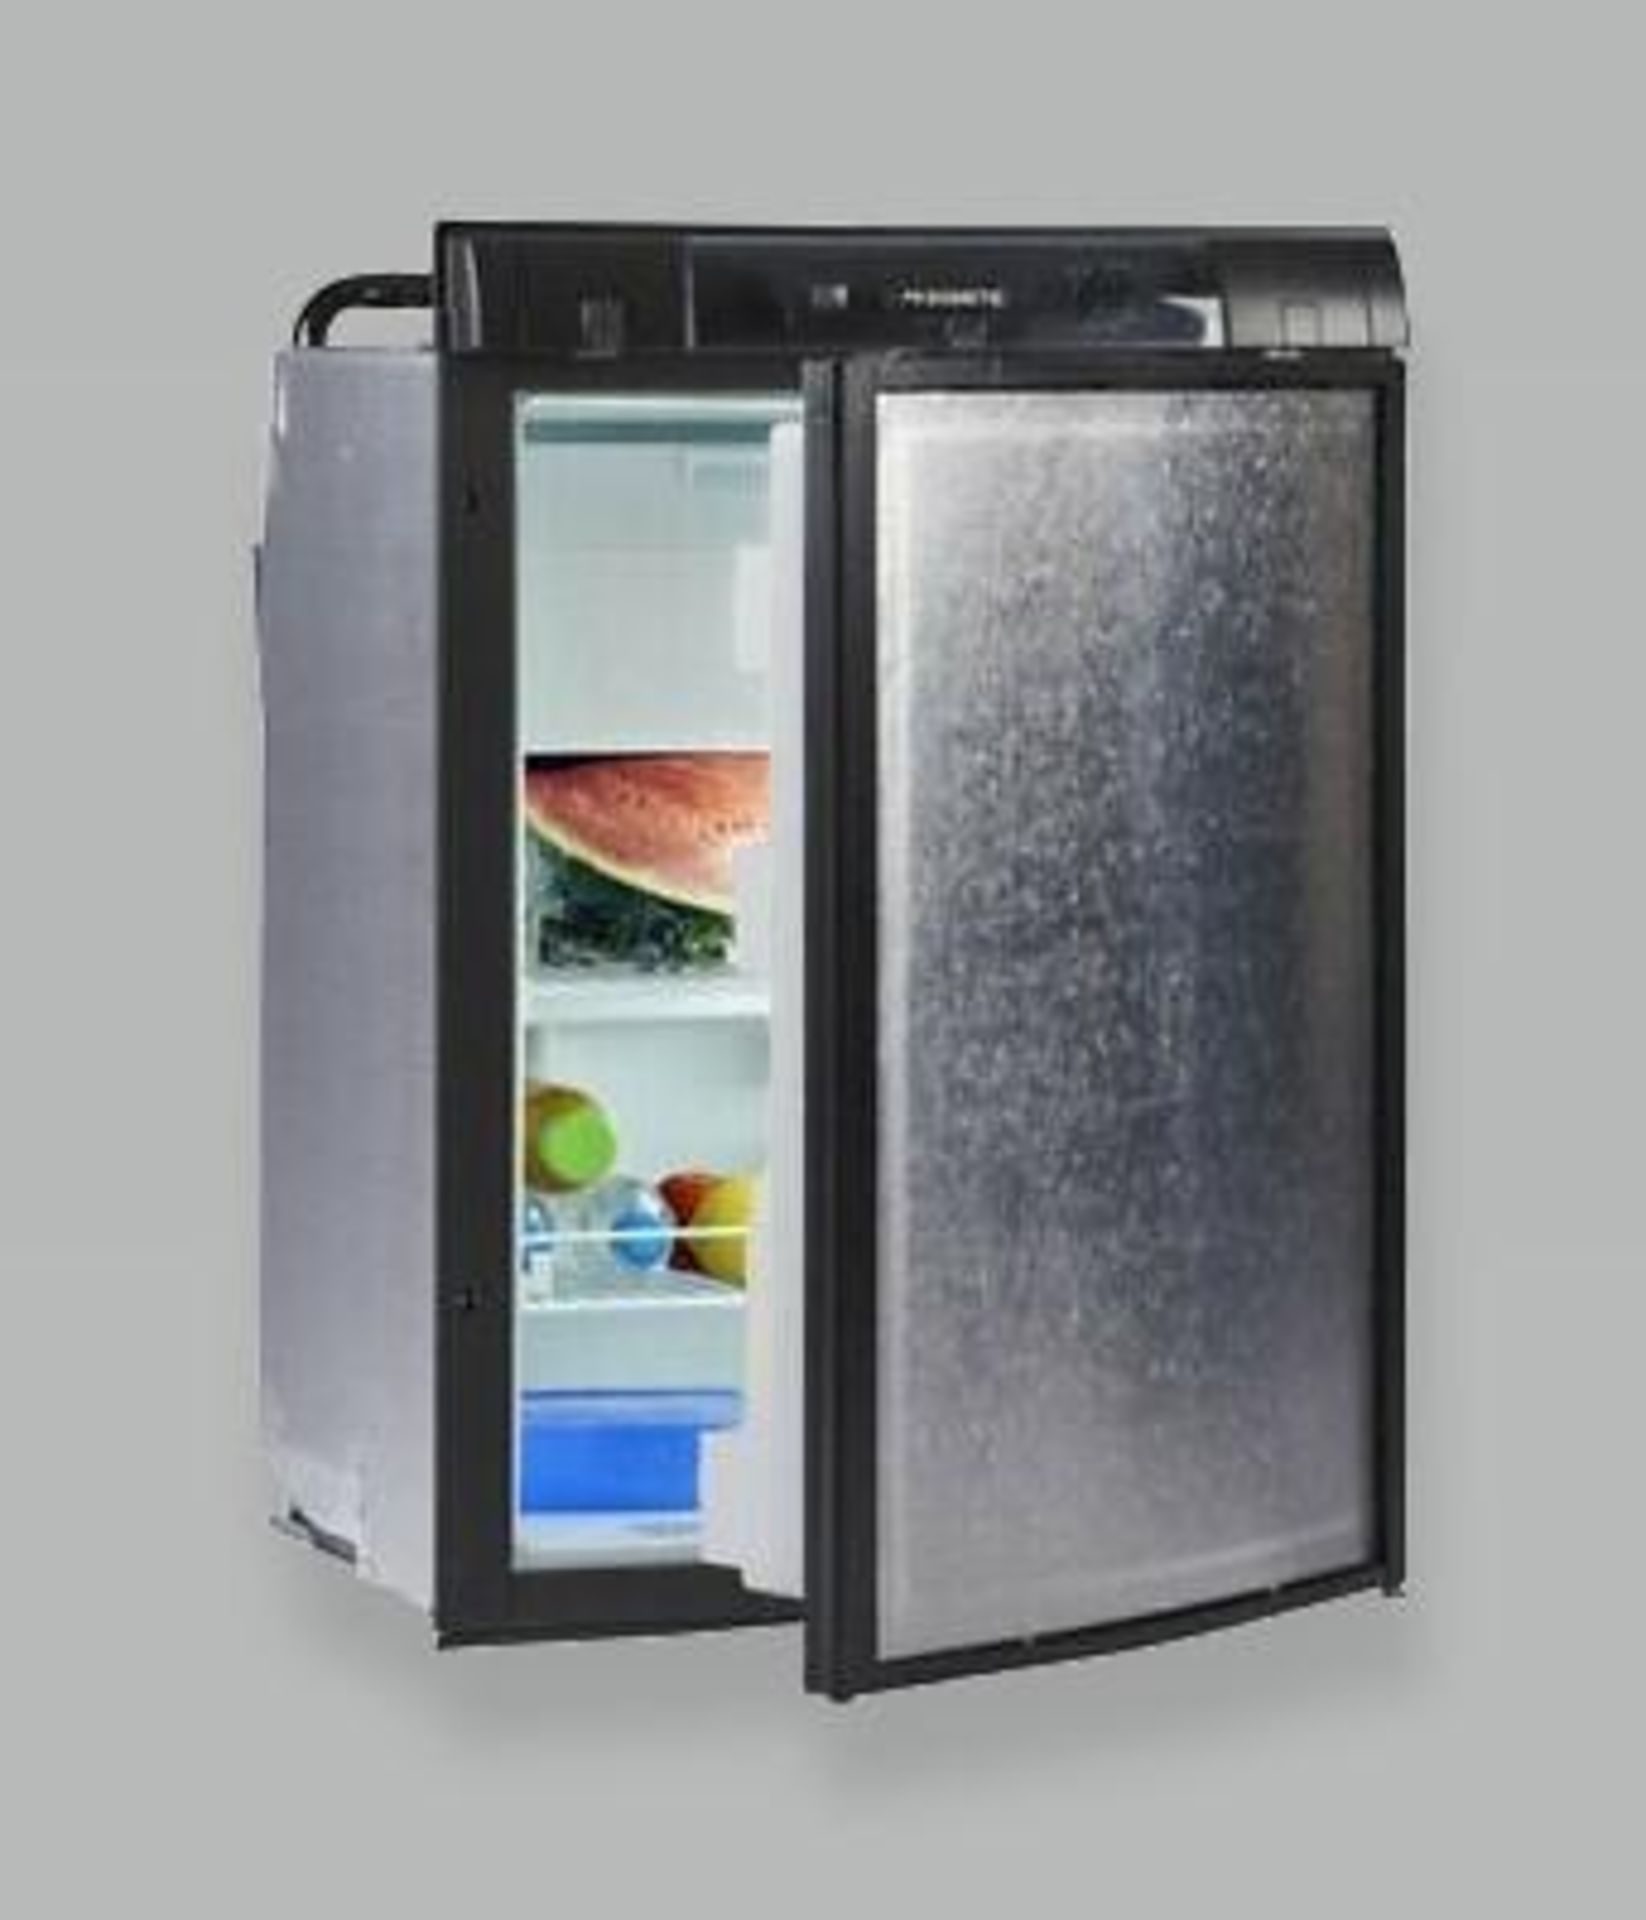 Qty 4 - Dometic refrigerator. Model RM2355RB. 90 liter capacity. 3 way, AC/DC/Gas. New in box.